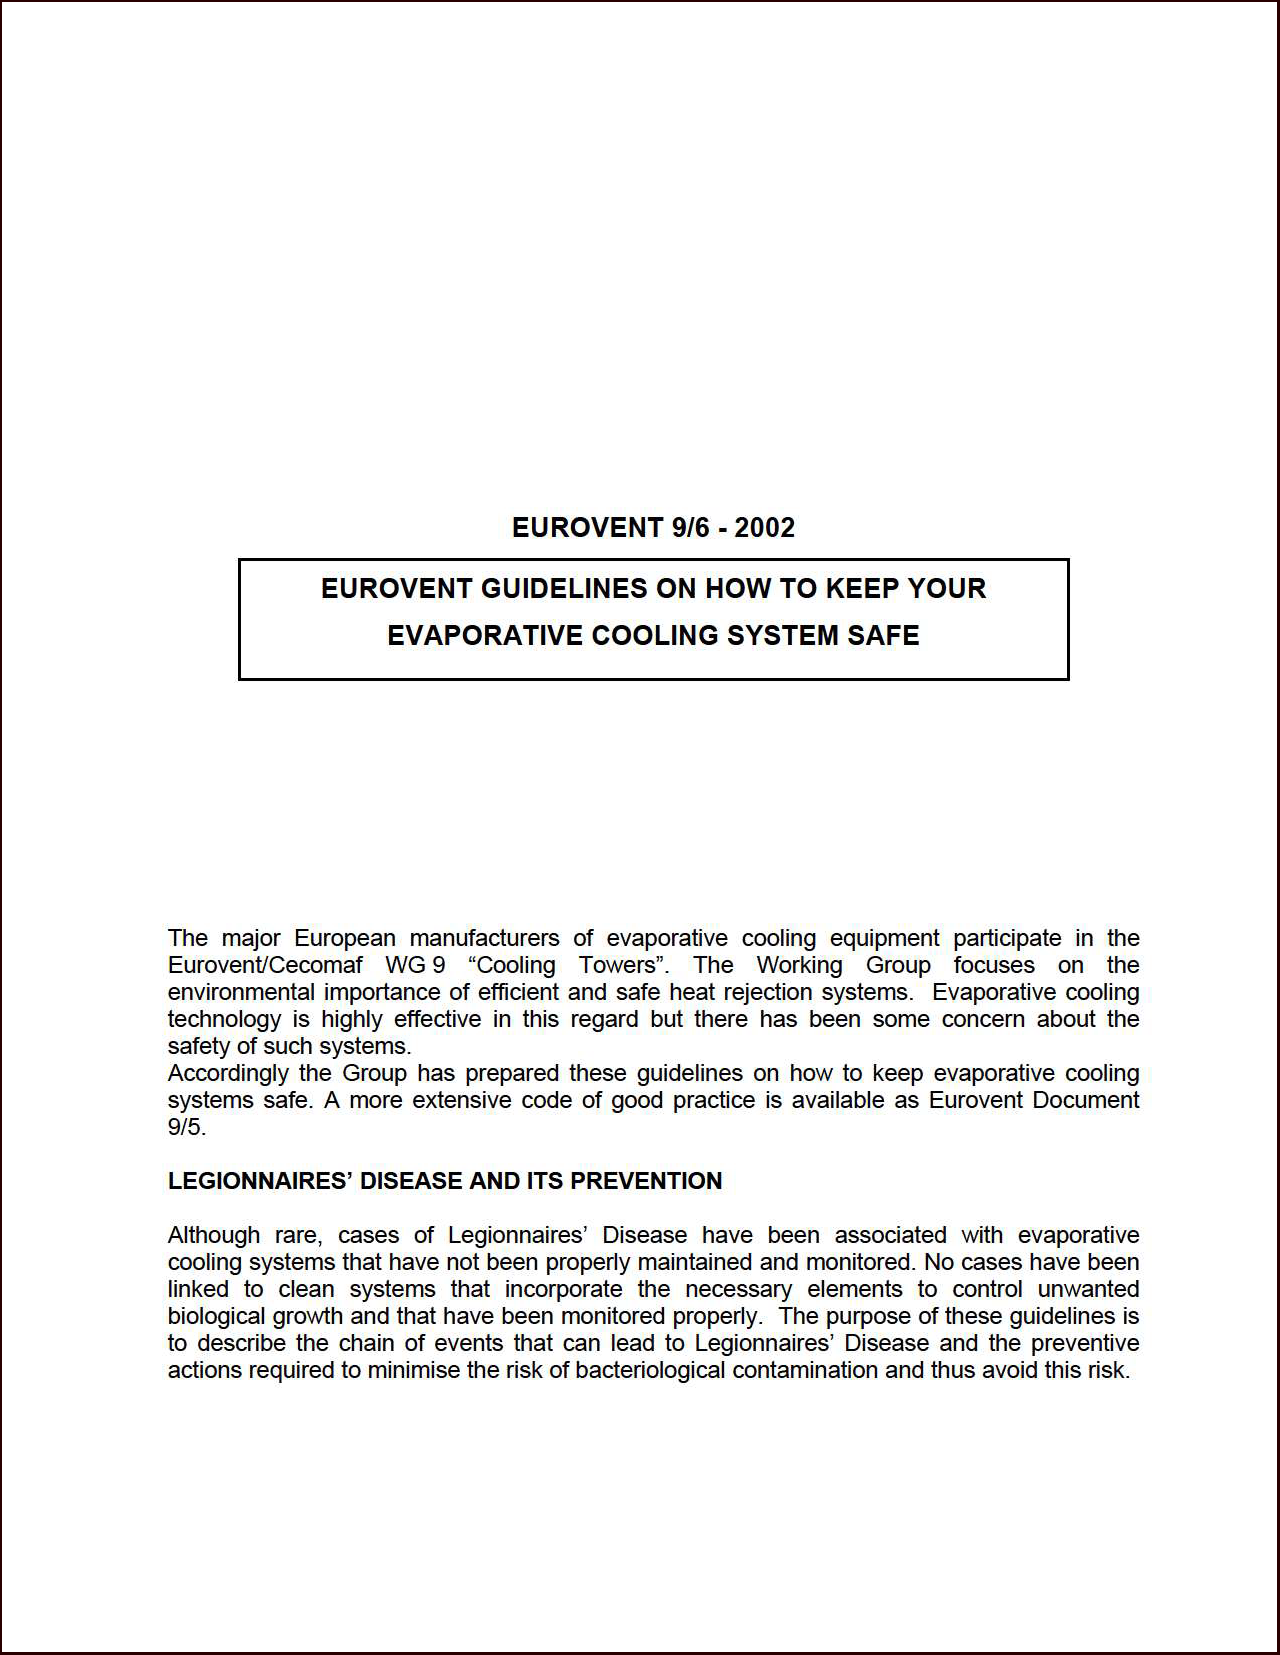 2002 - Eurovent guidelines on how to keep your evaporative cooling system safe